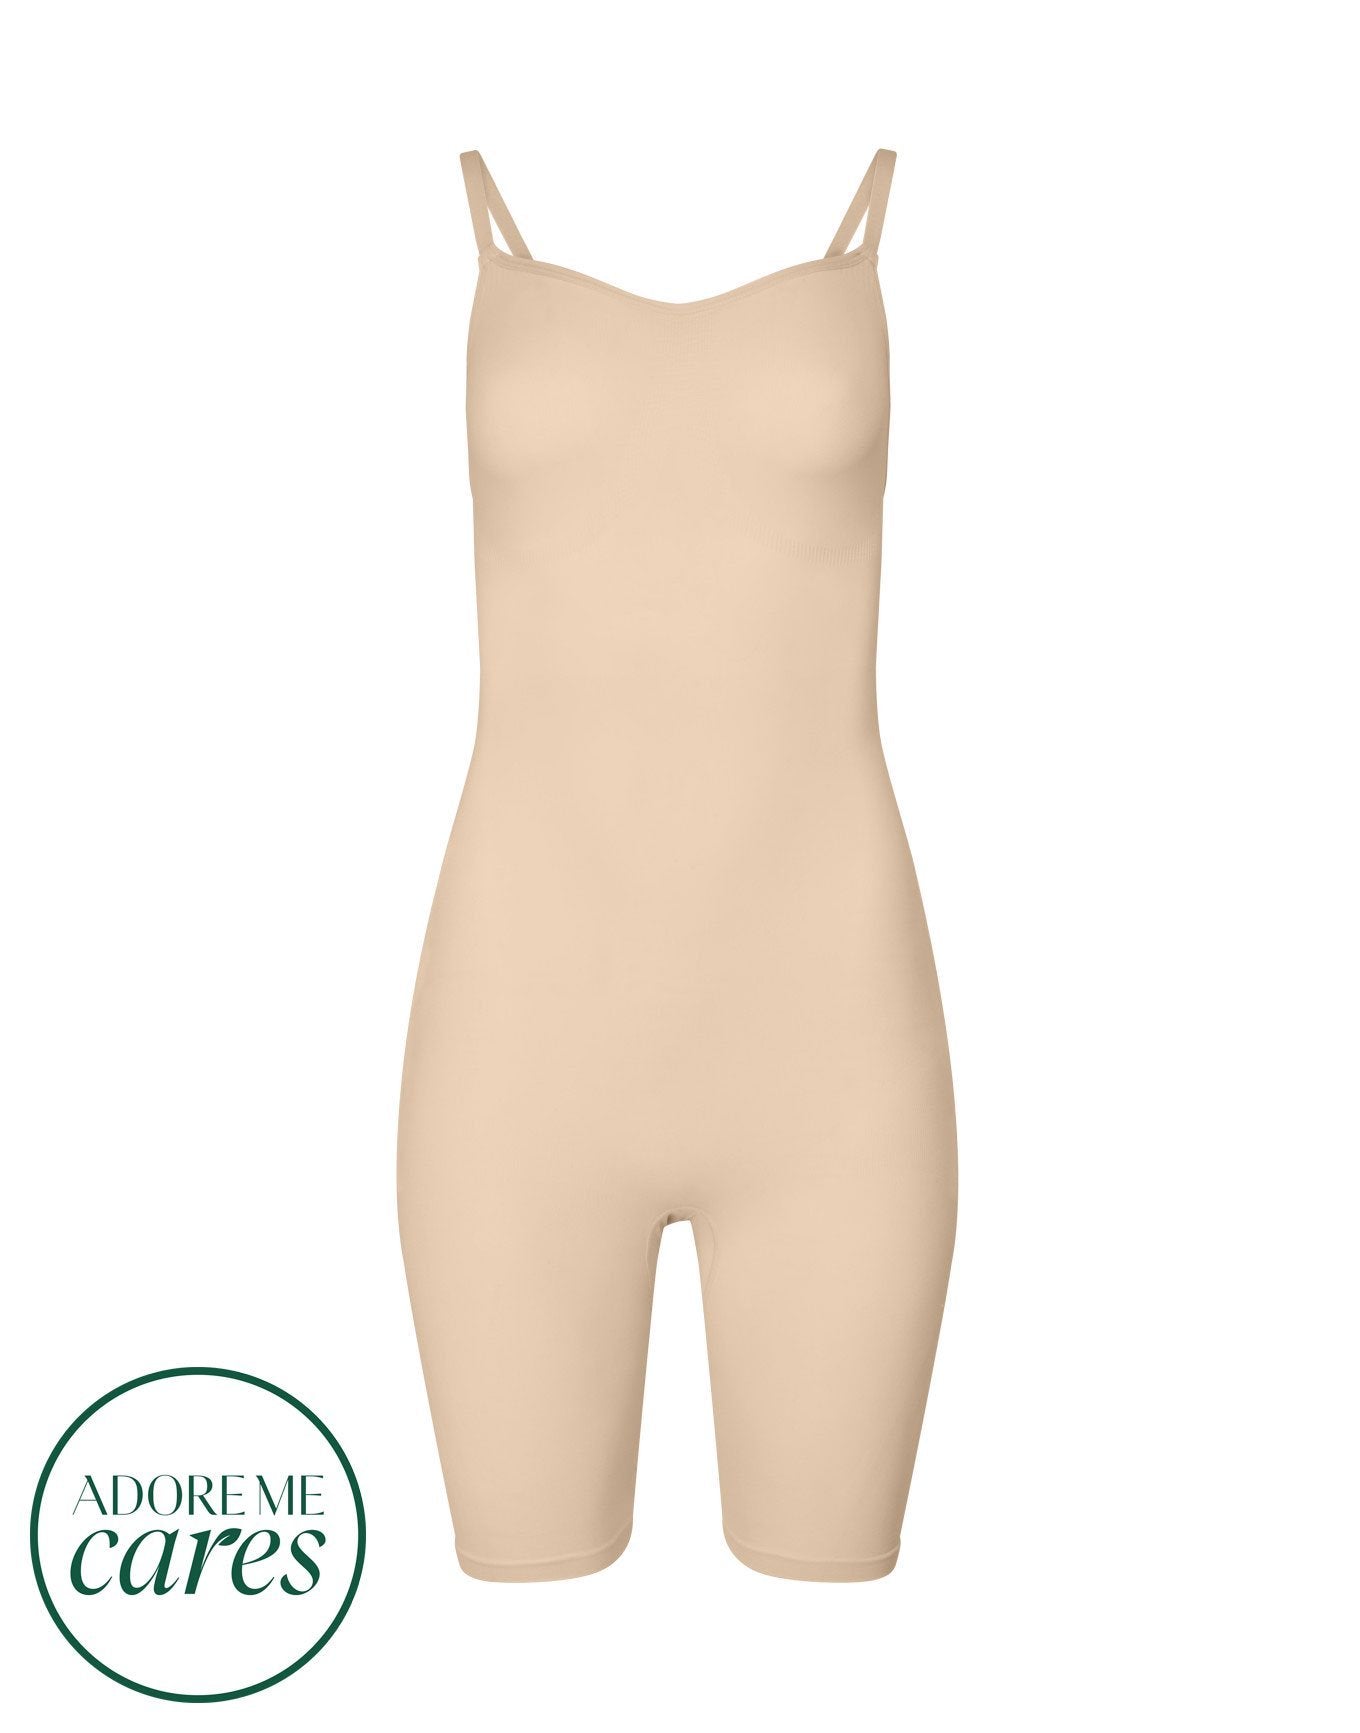 nueskin Analise High-Compression Bodysuit in color Dawn and shape bodysuit